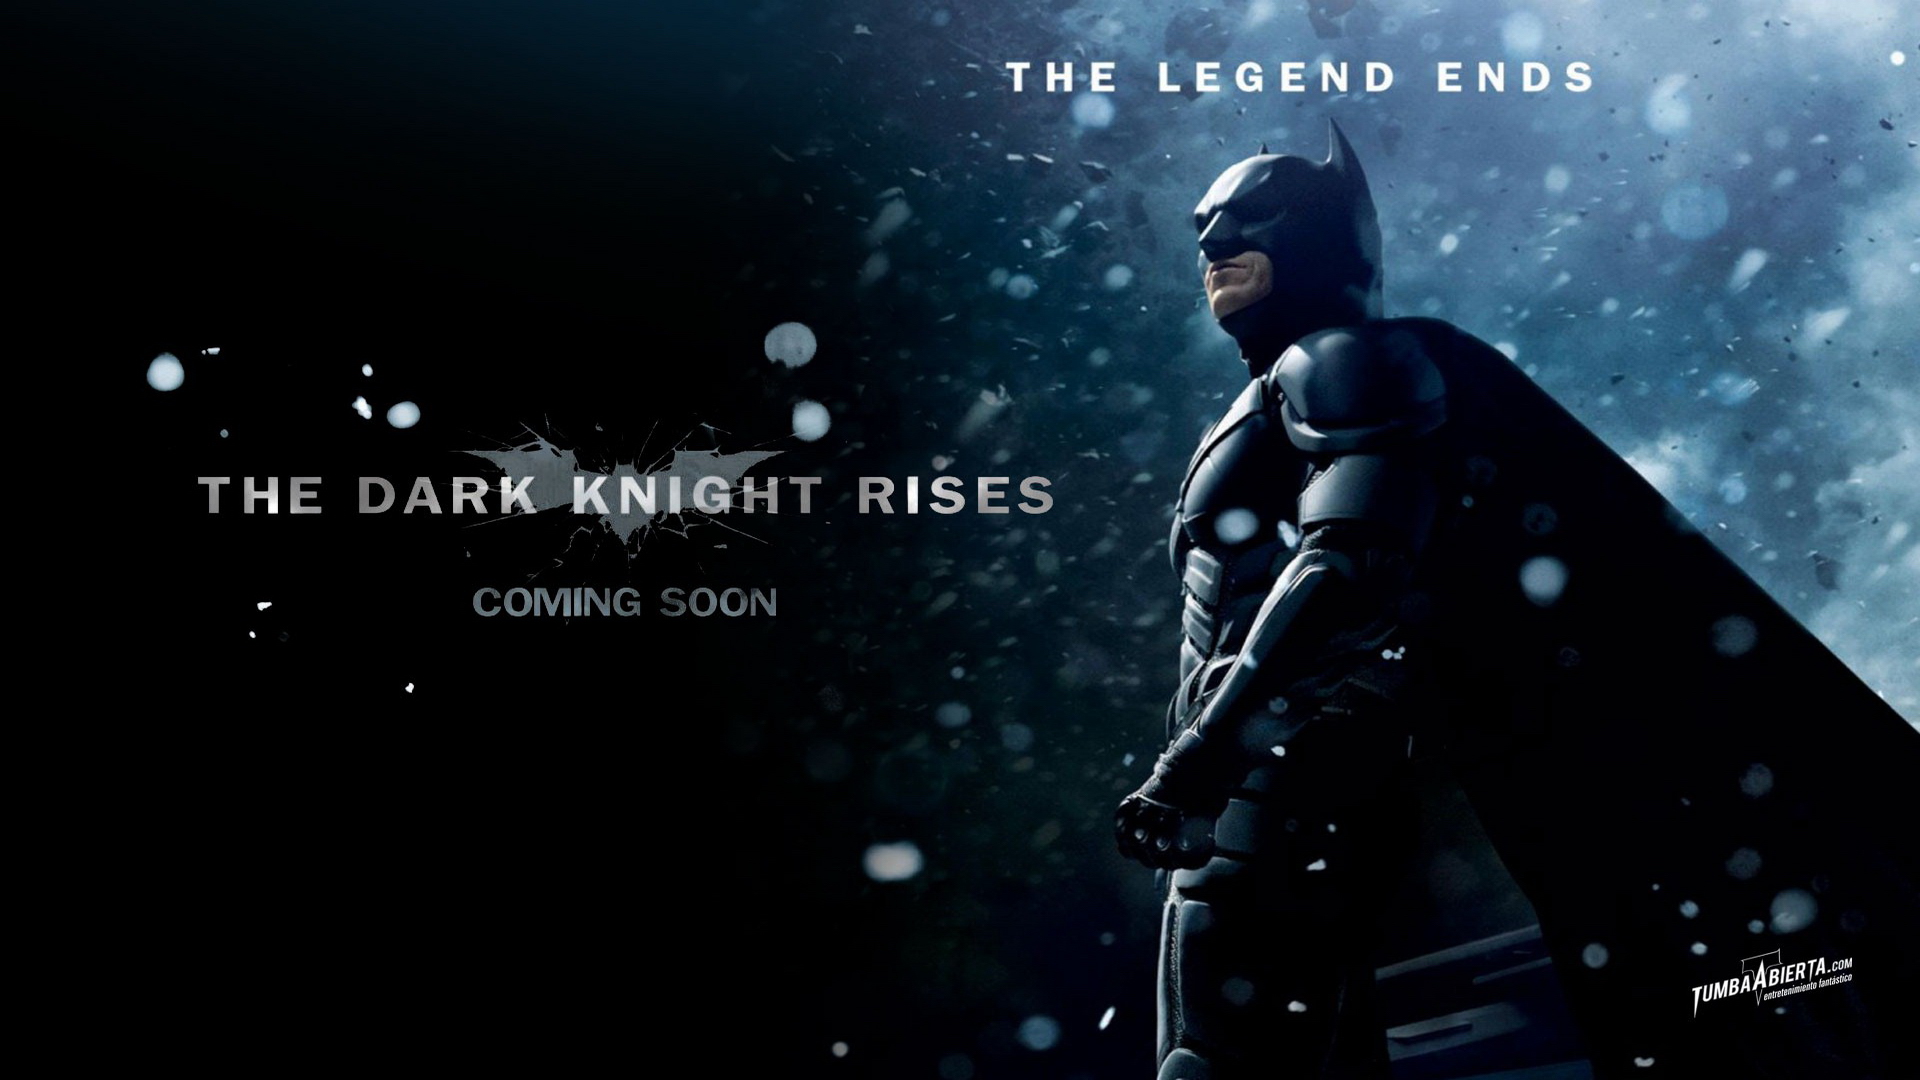 free for apple download The Dark Knight